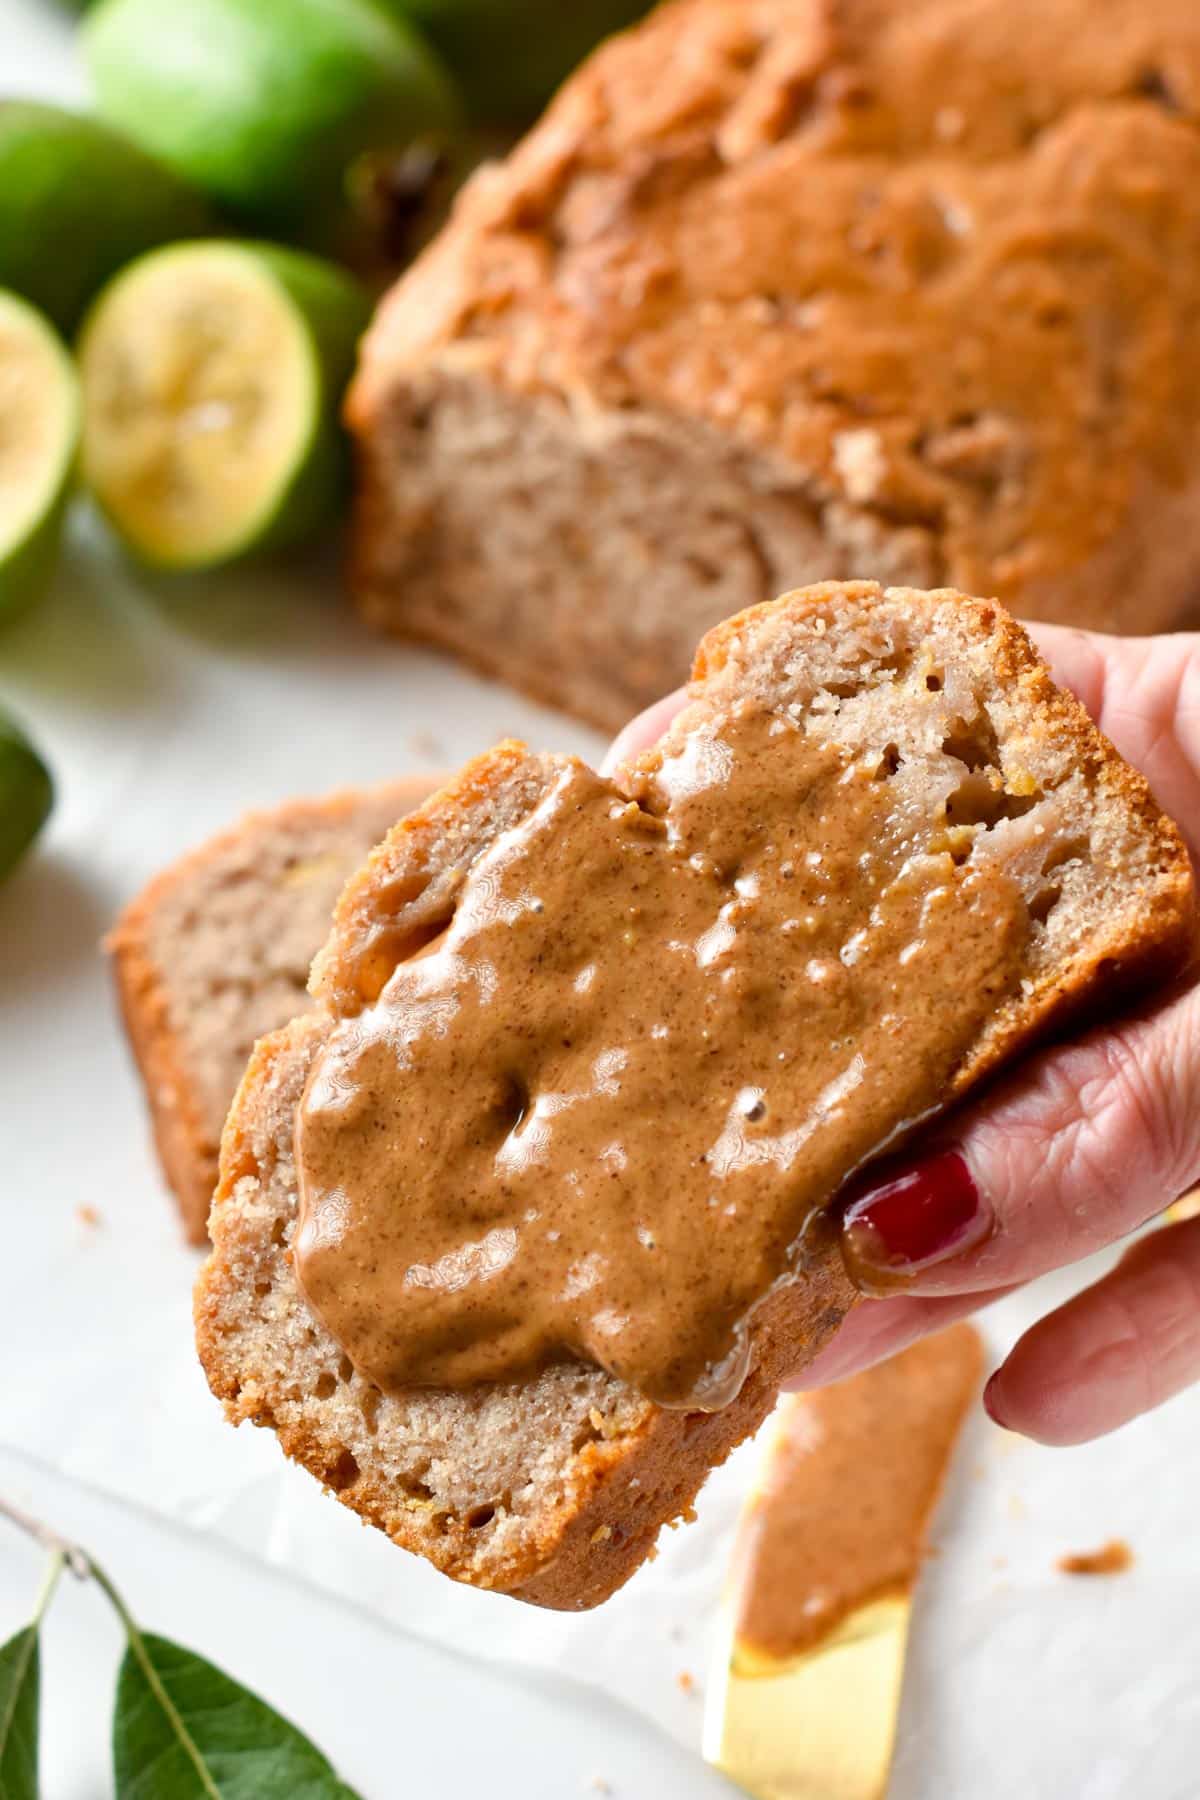 This Feijoa Loaf is a moist, sweet loaf flavored with Feijoa fruits and perfect to use all your Feijoa this Autumn